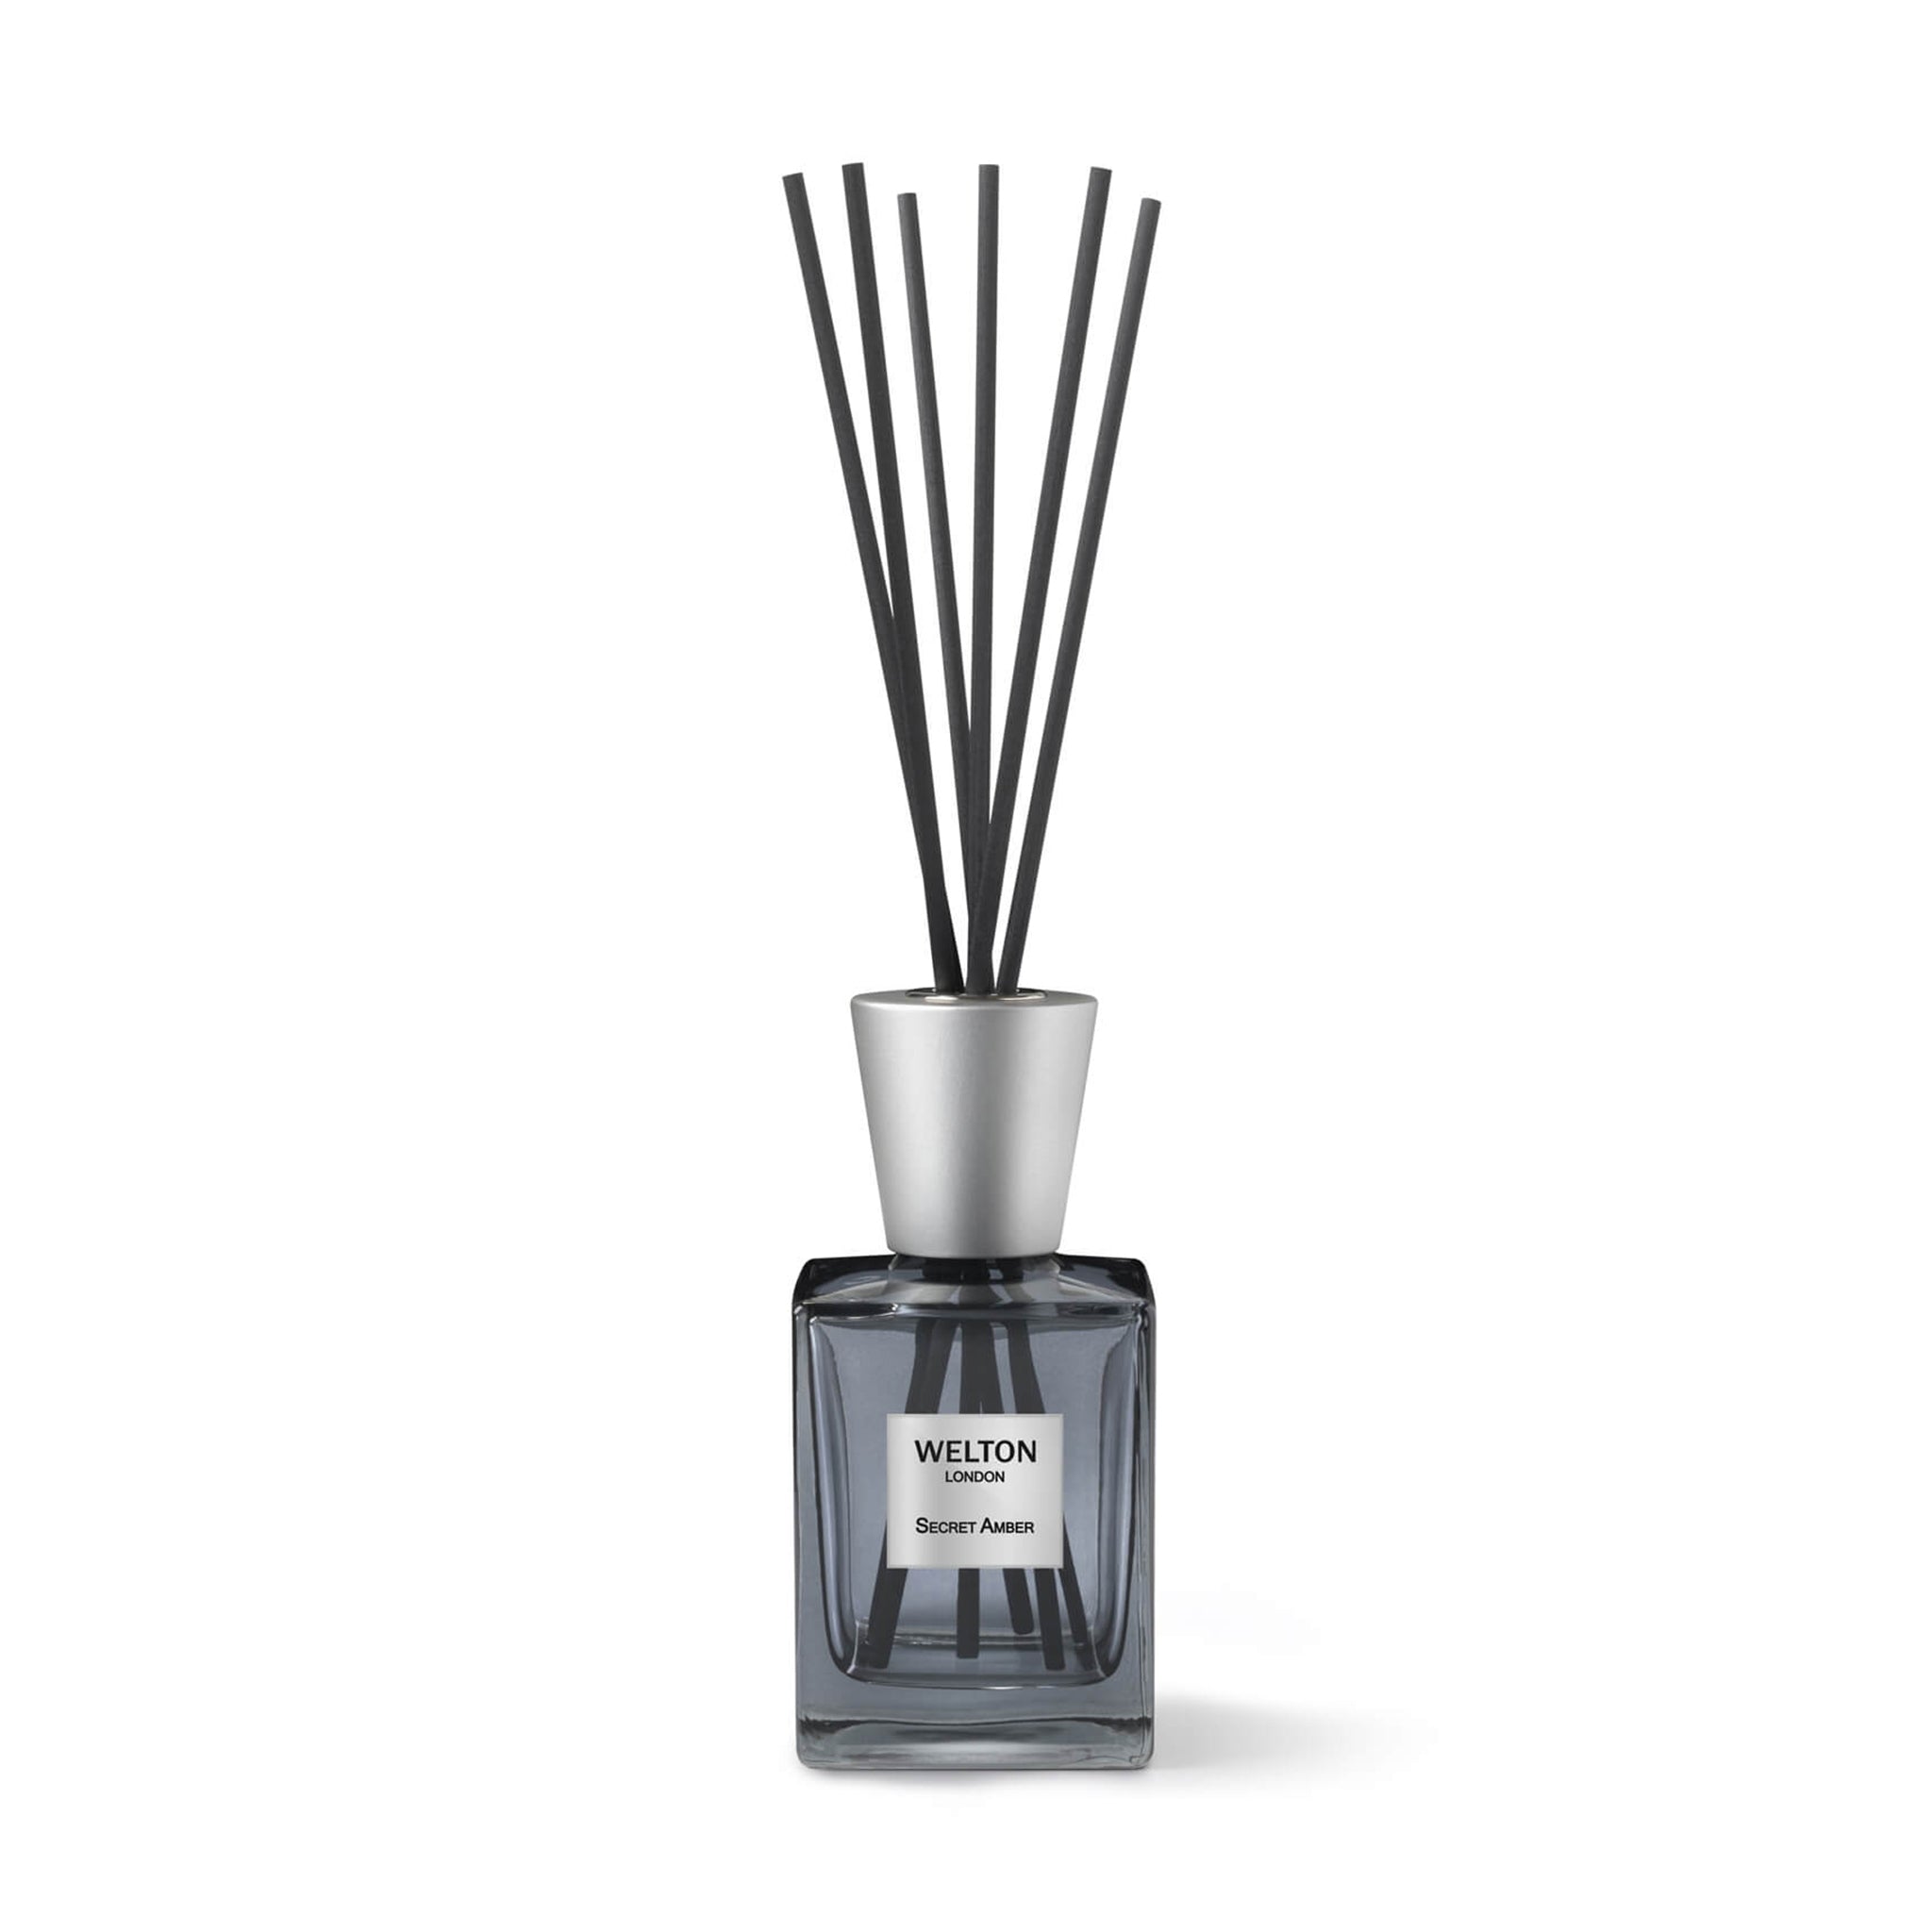 welton london diffuser secret amber 500 ml
floral - amber - musky diffusers 